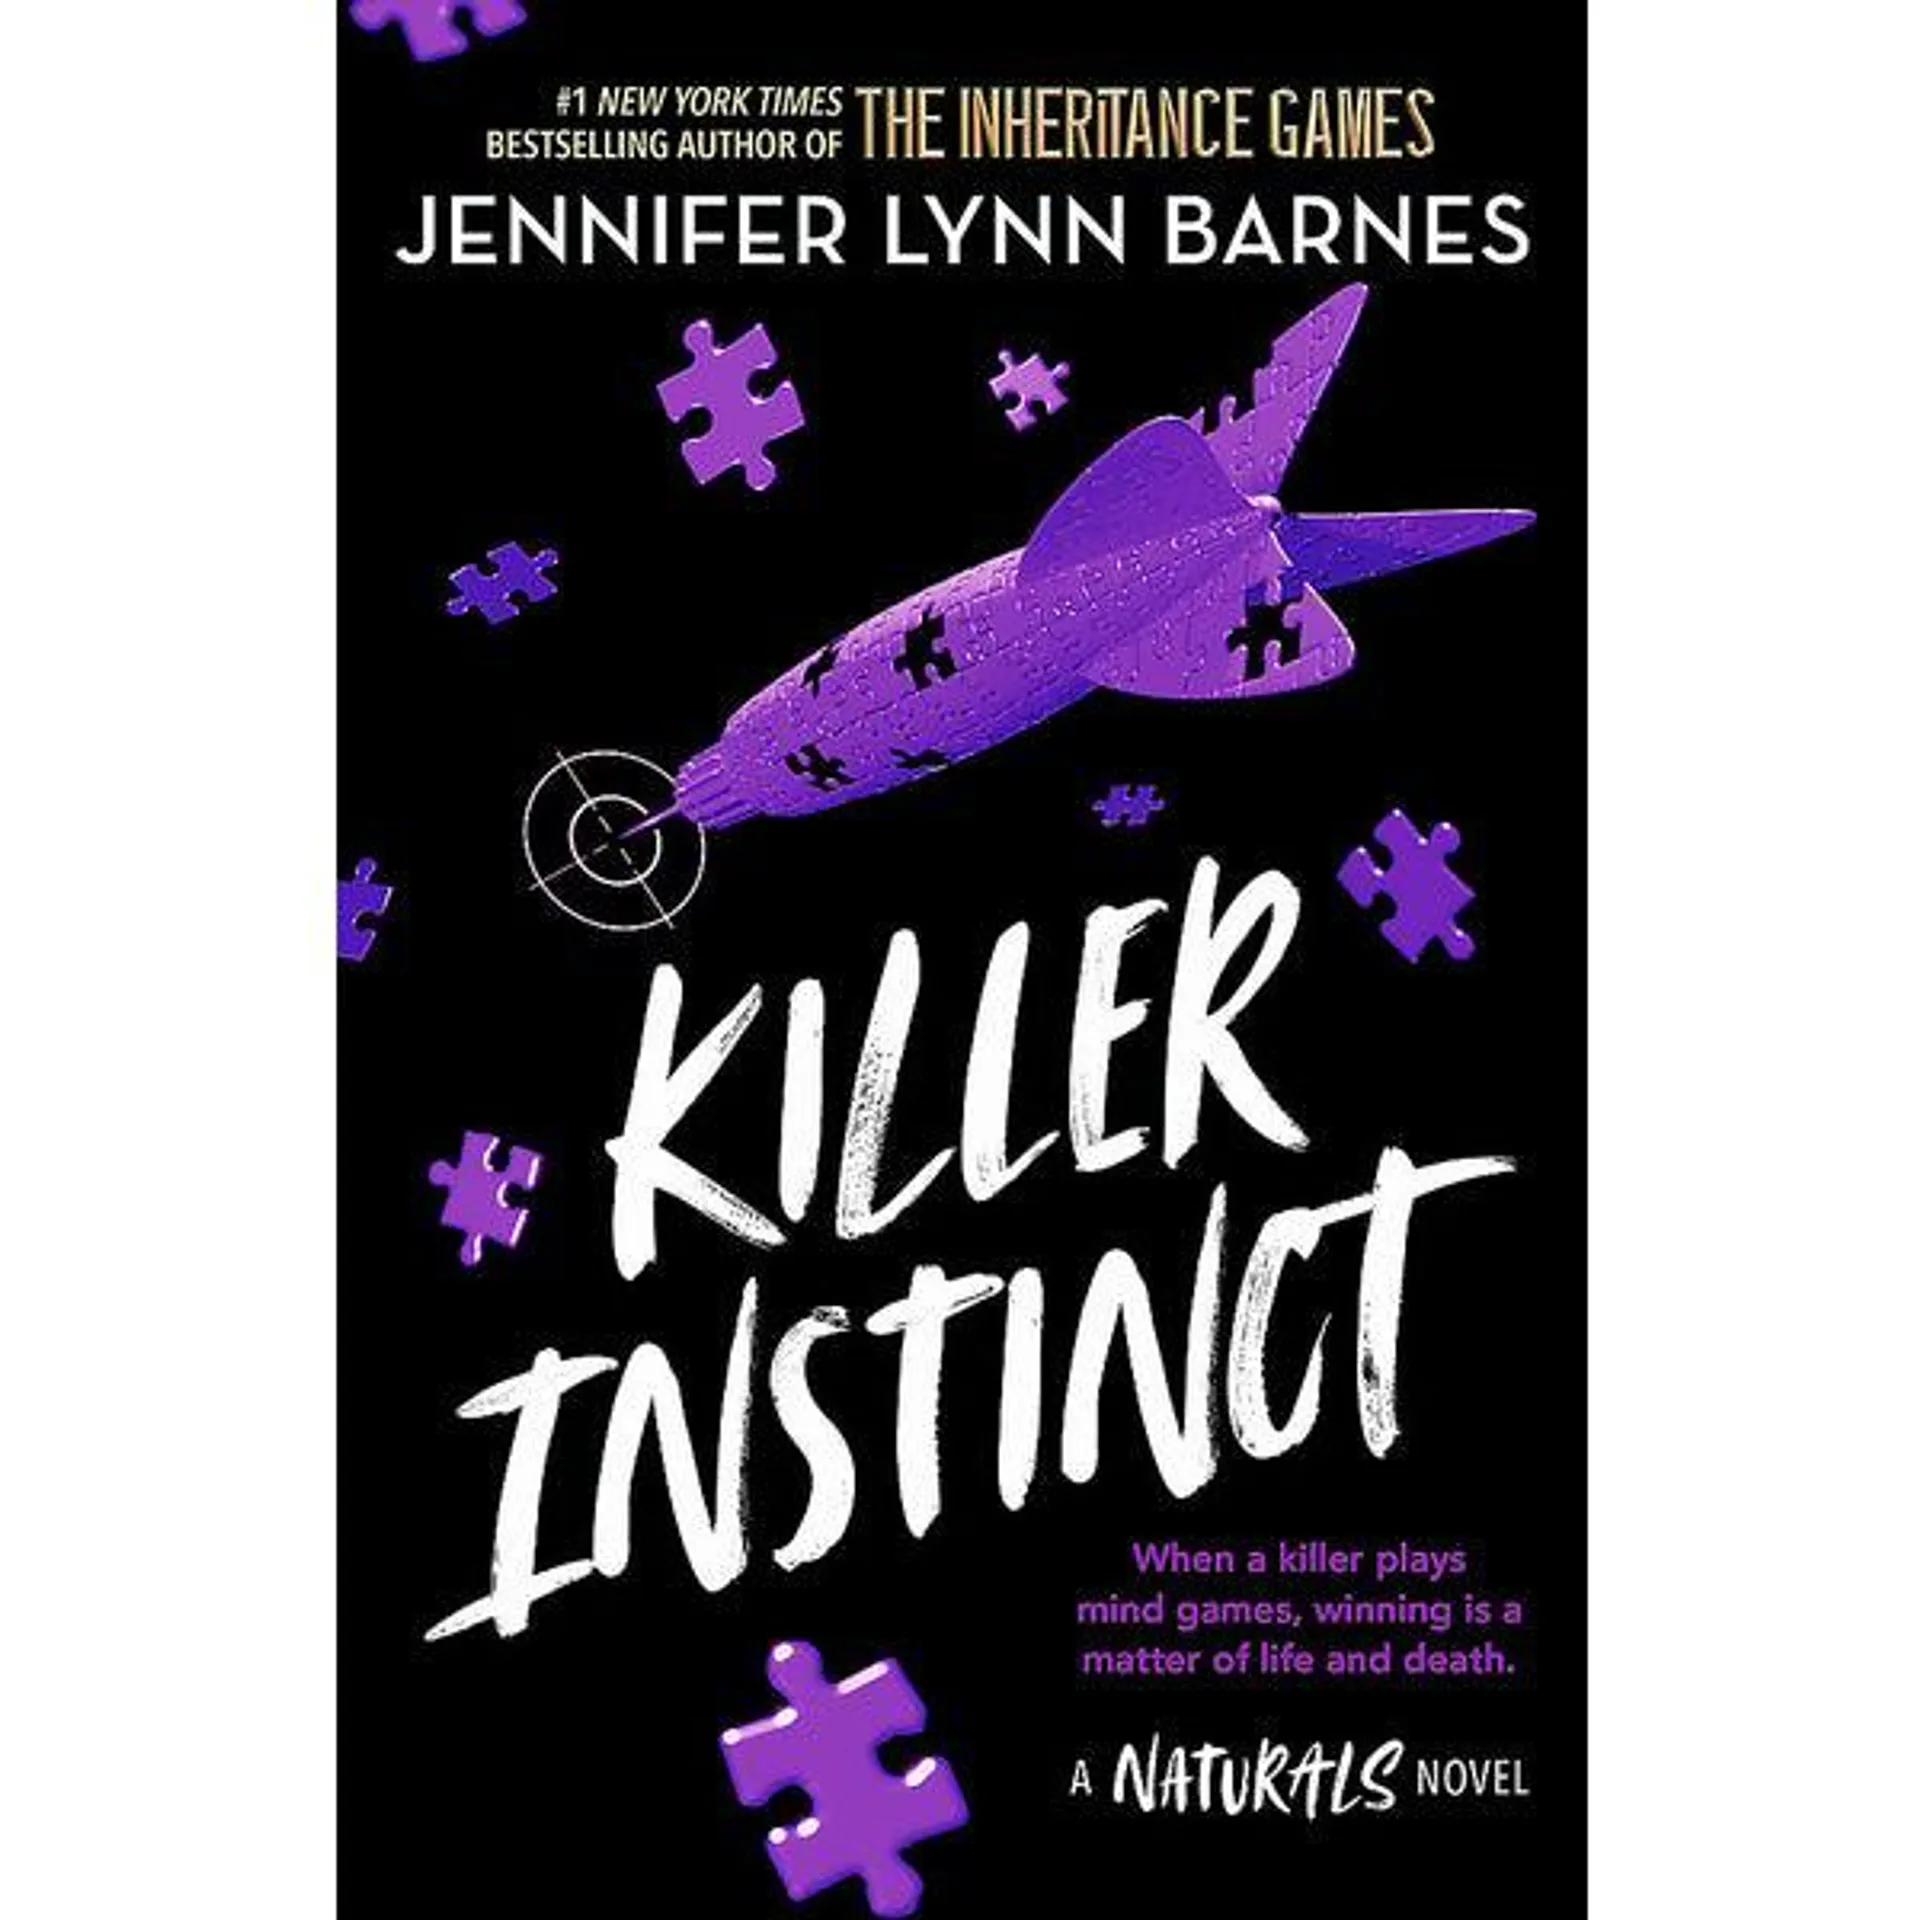 Book 2 in this unputdownable mystery series from the author of The Inheritance Games